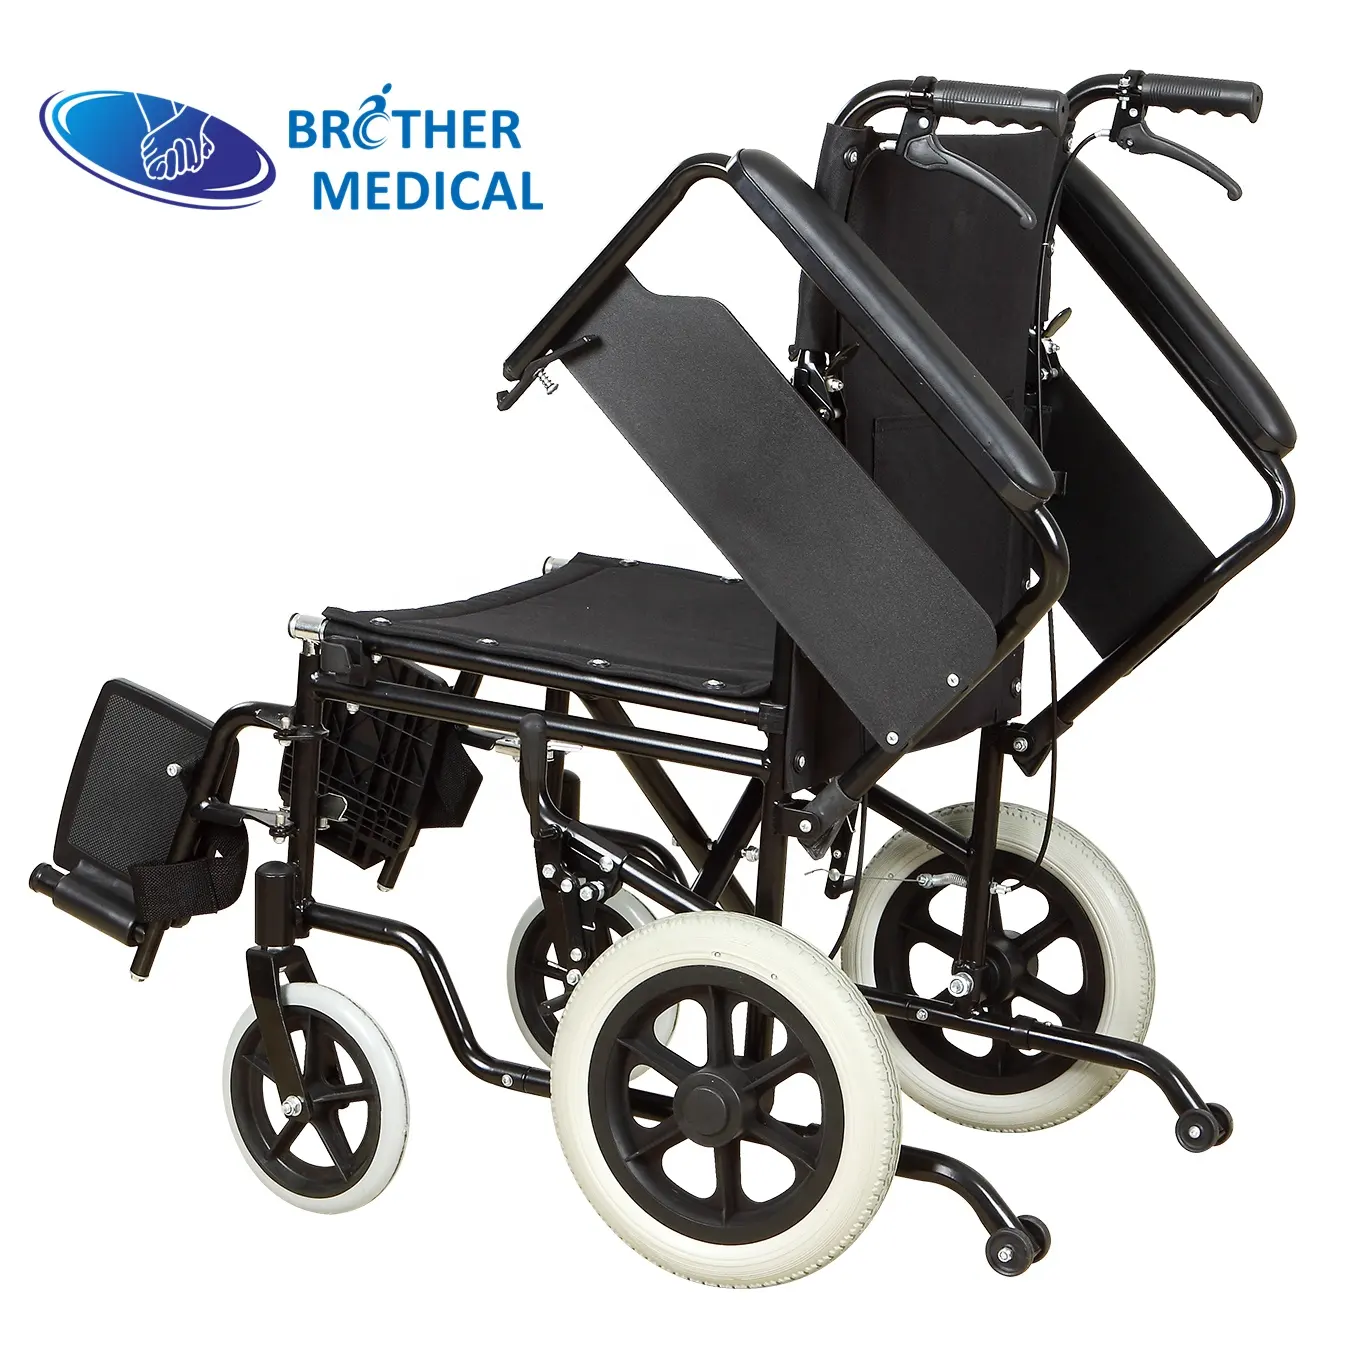 Manufacturer Wheelchair Top Number 1 Best Seller In Alibaba Silla Ruedas Orthopedic Manual Wheelchair ....only $29.9